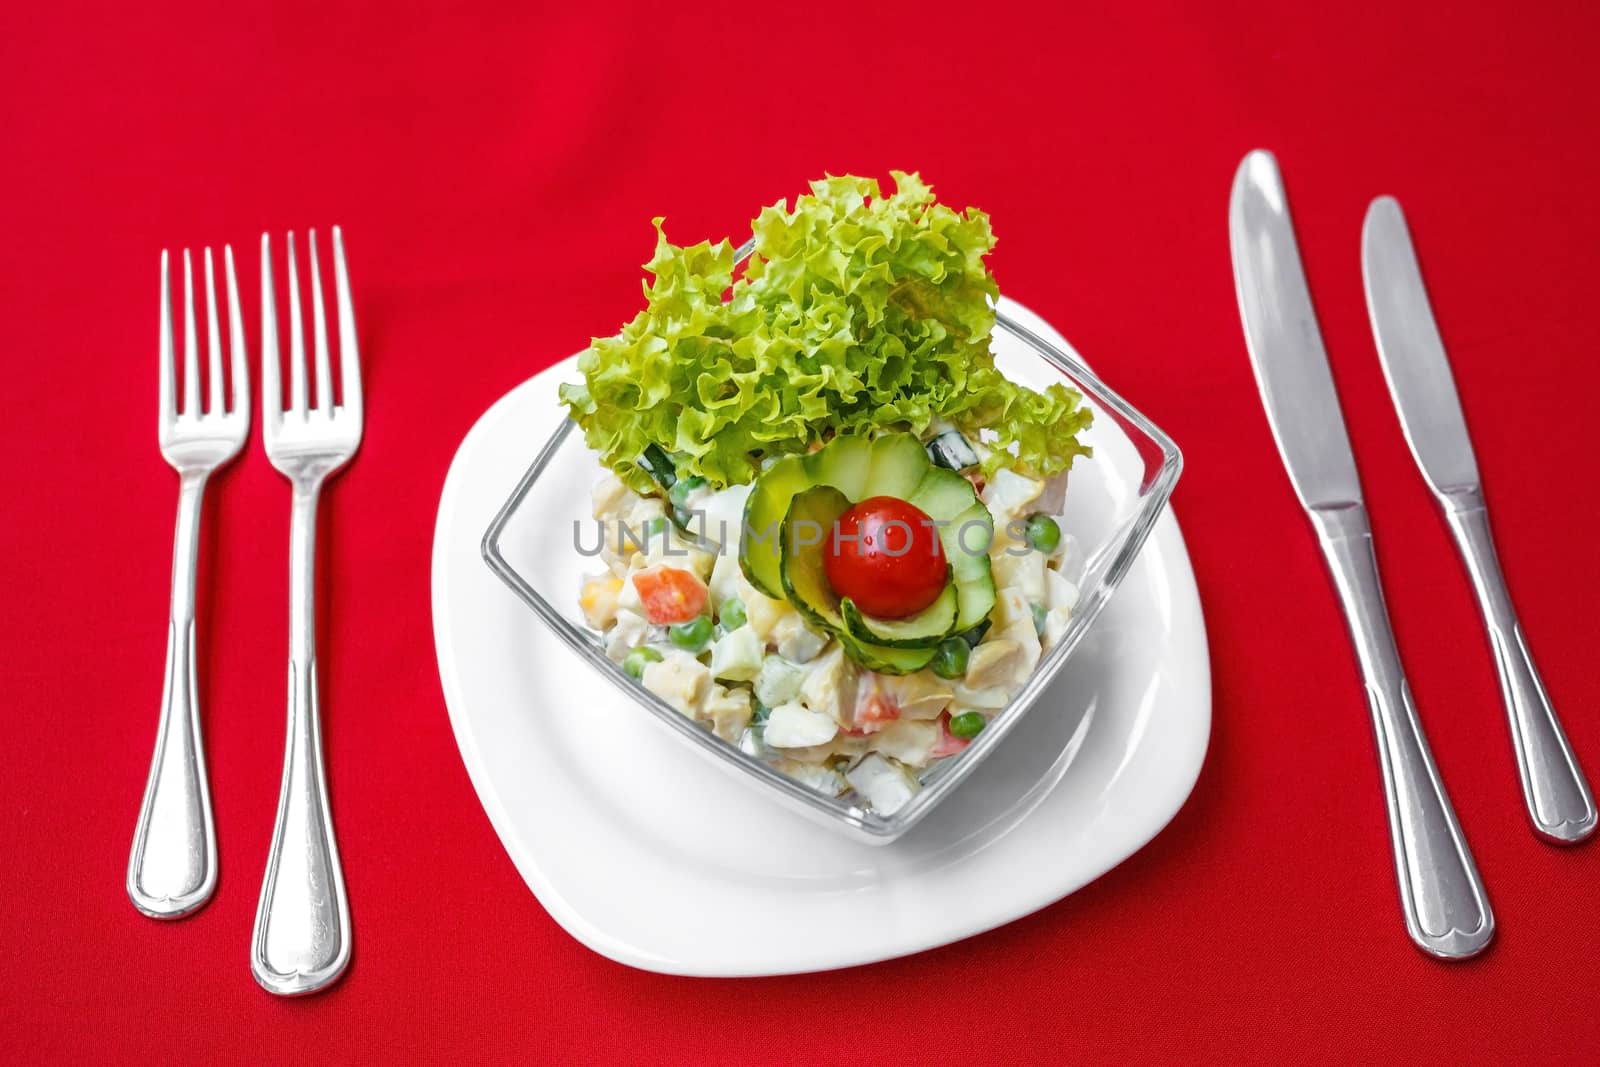 Salad with fresh vegetables, served on the table. On a red tablecloth close-up